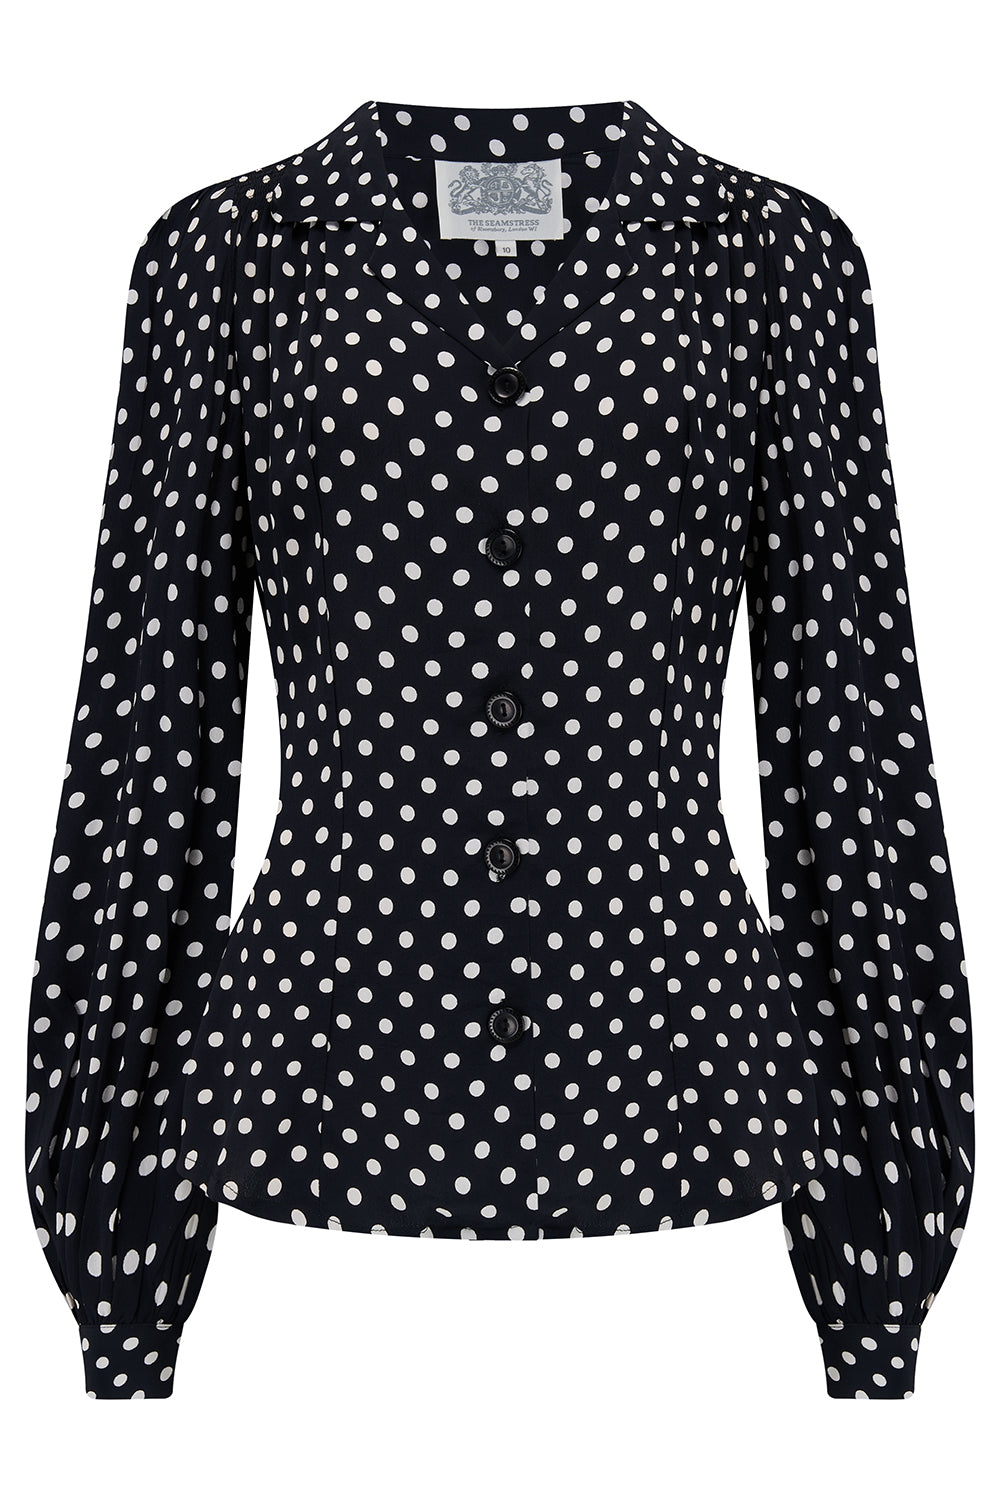 Poppy Long Sleeve Blouse in Black Polka Dot , Authentic & Classic 1940s Vintage Style - True and authentic vintage style clothing, inspired by the Classic styles of CC41 , WW2 and the fun 1950s RocknRoll era, for everyday wear plus events like Goodwood Revival, Twinwood Festival and Viva Las Vegas Rockabilly Weekend Rock n Romance The Seamstress Of Bloomsbury